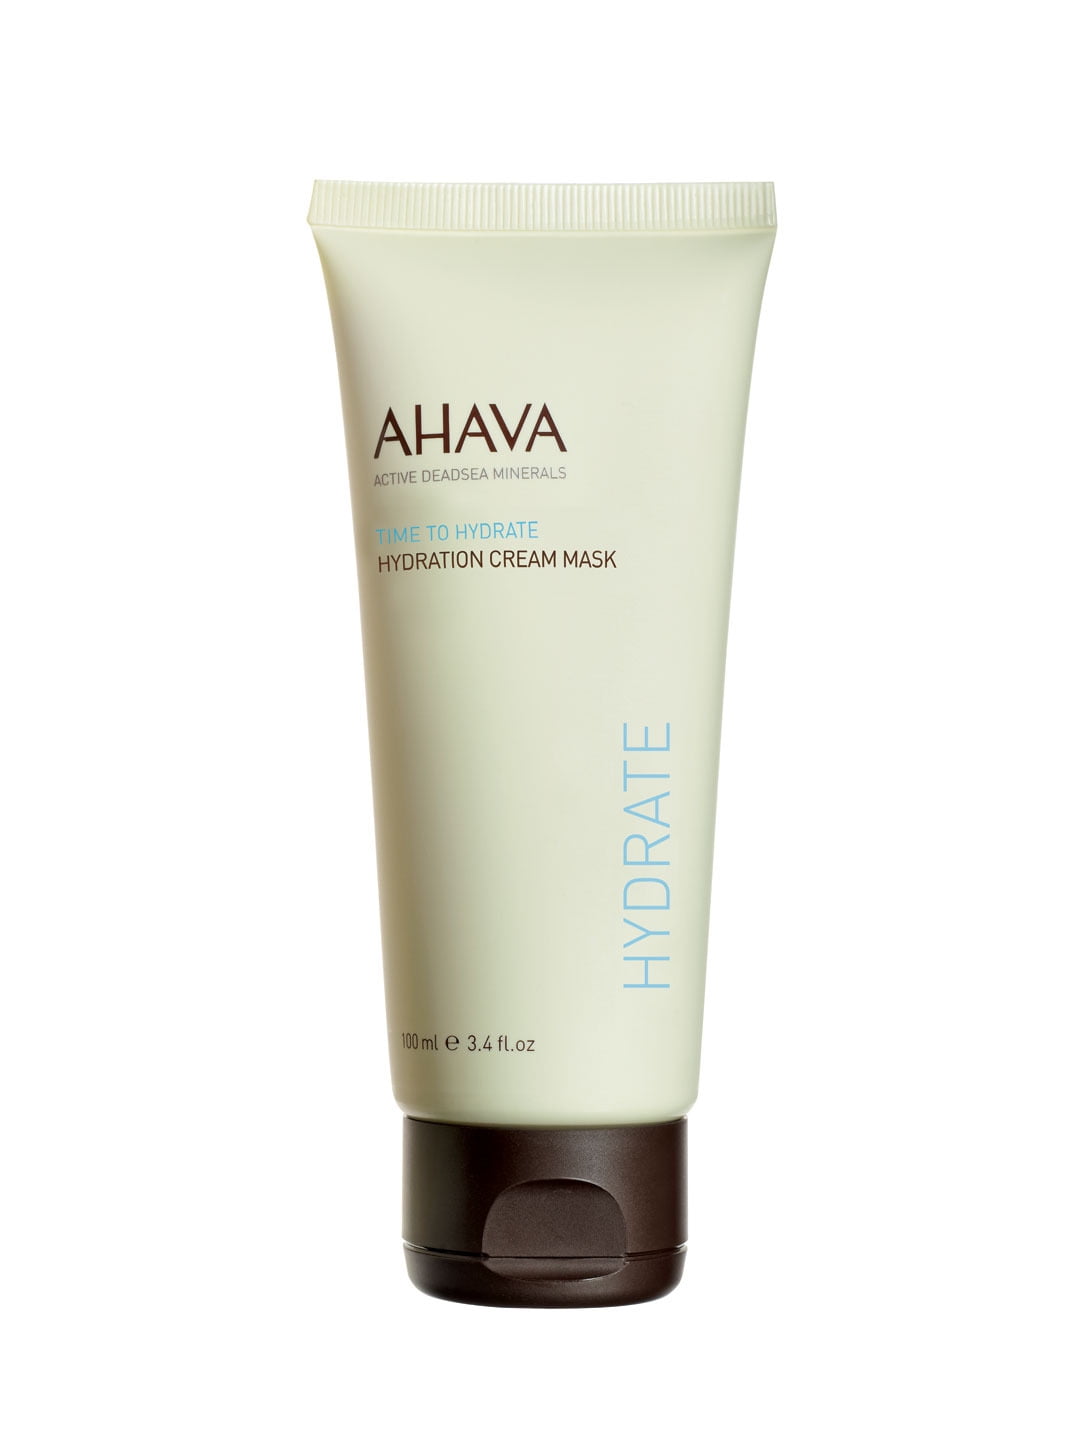 AHAVA Time Facial Mask - To Hydrate oz. 3.4 - Cream Hydration